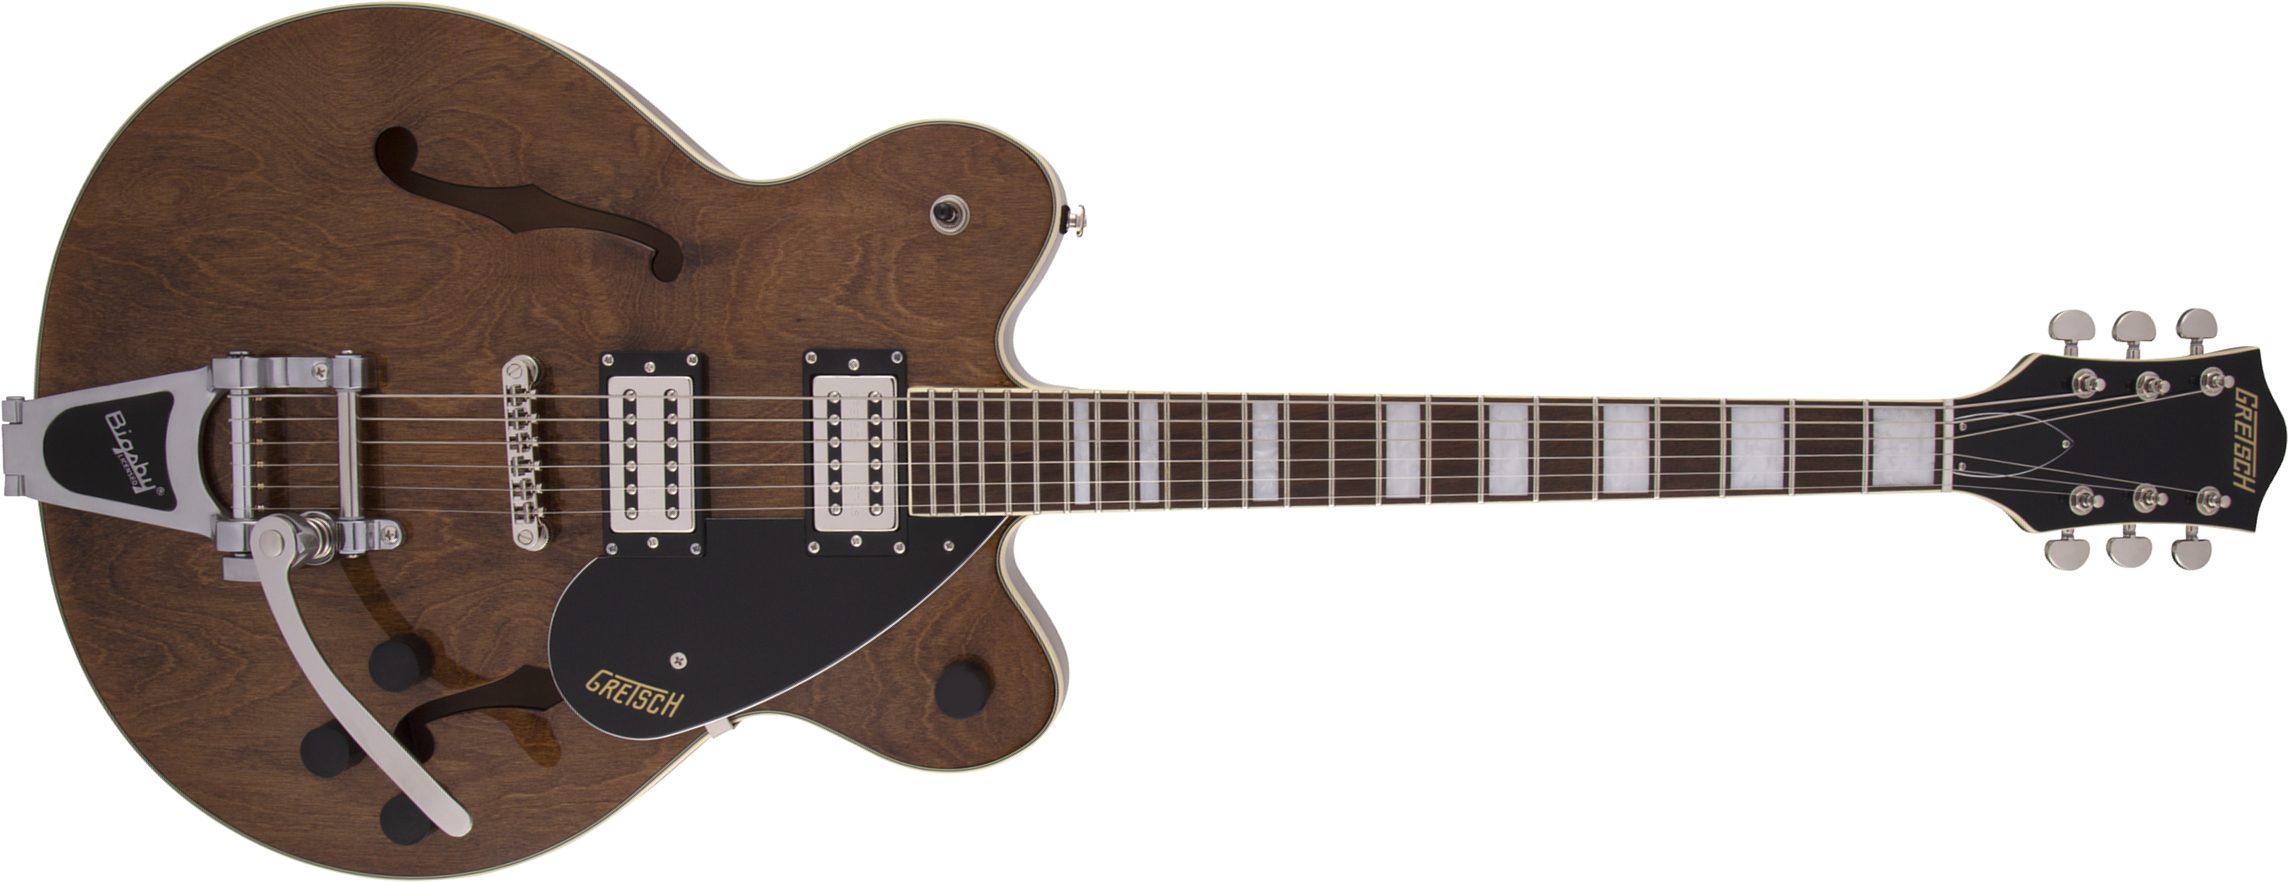 Gretsch G2655t Streamliner Center Block Jr Bigsby Hh Trem Lau - Imperial Stain - Semi-hollow electric guitar - Main picture